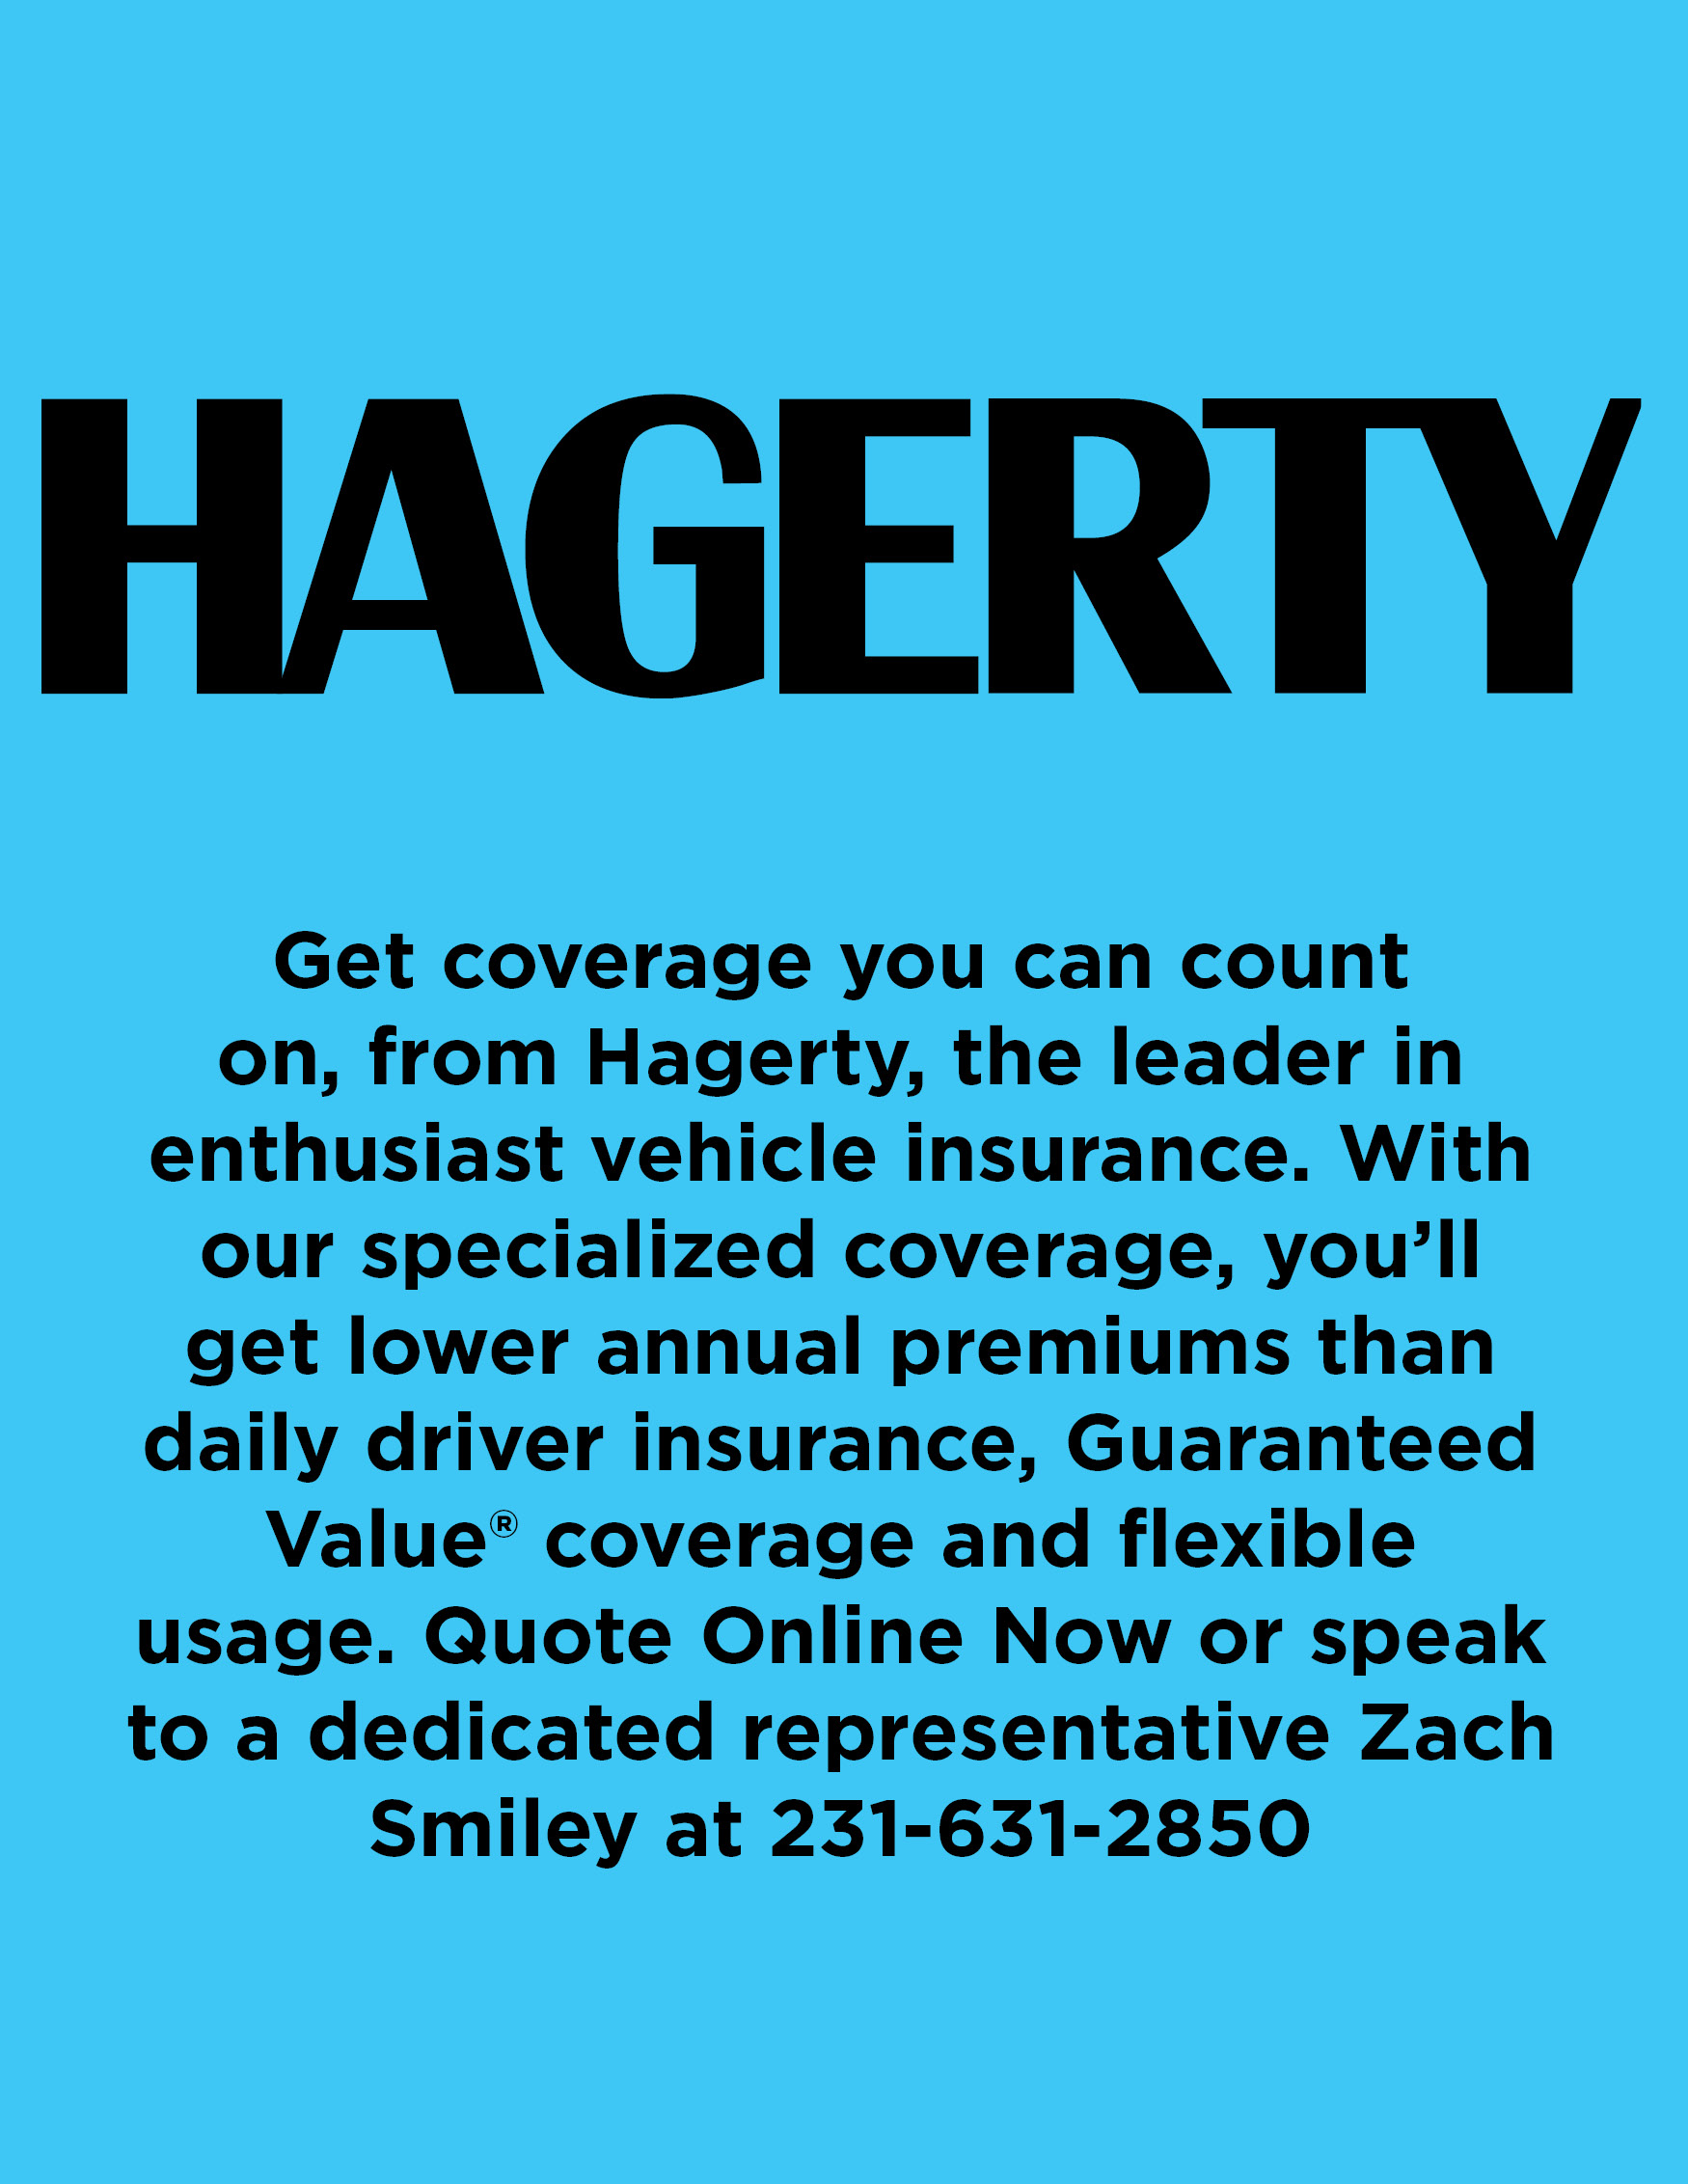 Hagerty_OFFER ONLY